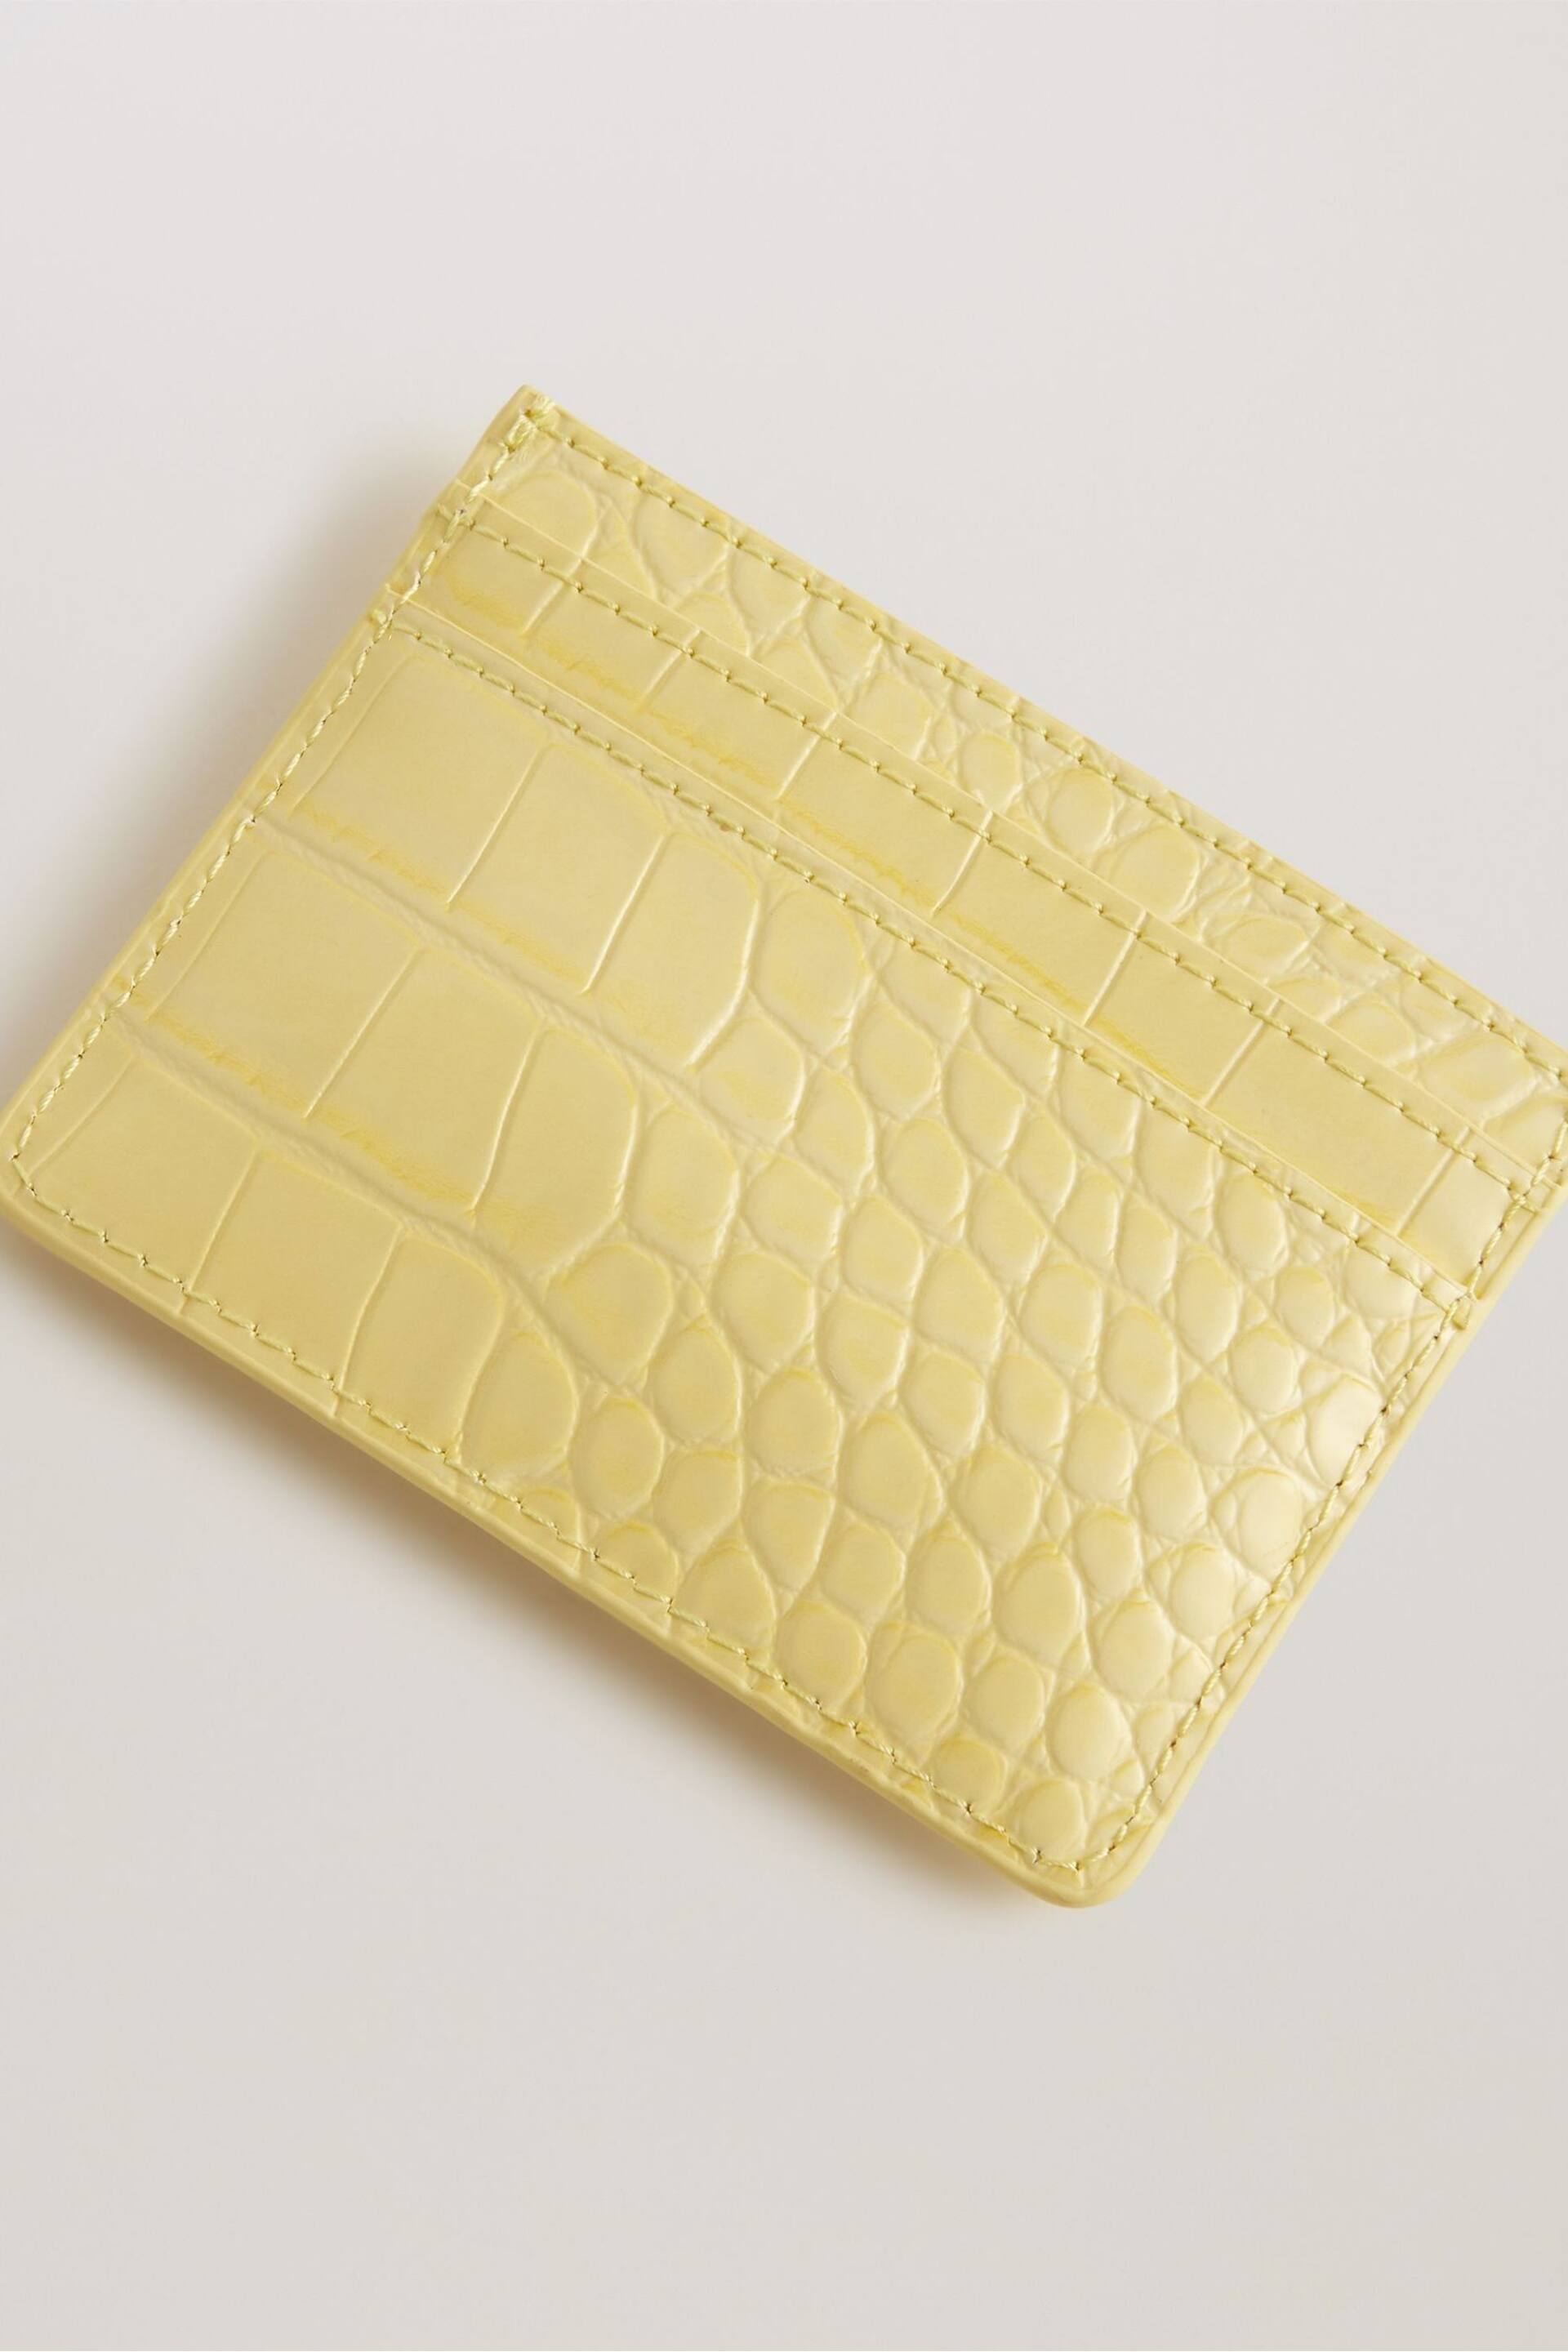 Ted Baker Yellow Coly Croc Effect Card Holder - Image 2 of 3